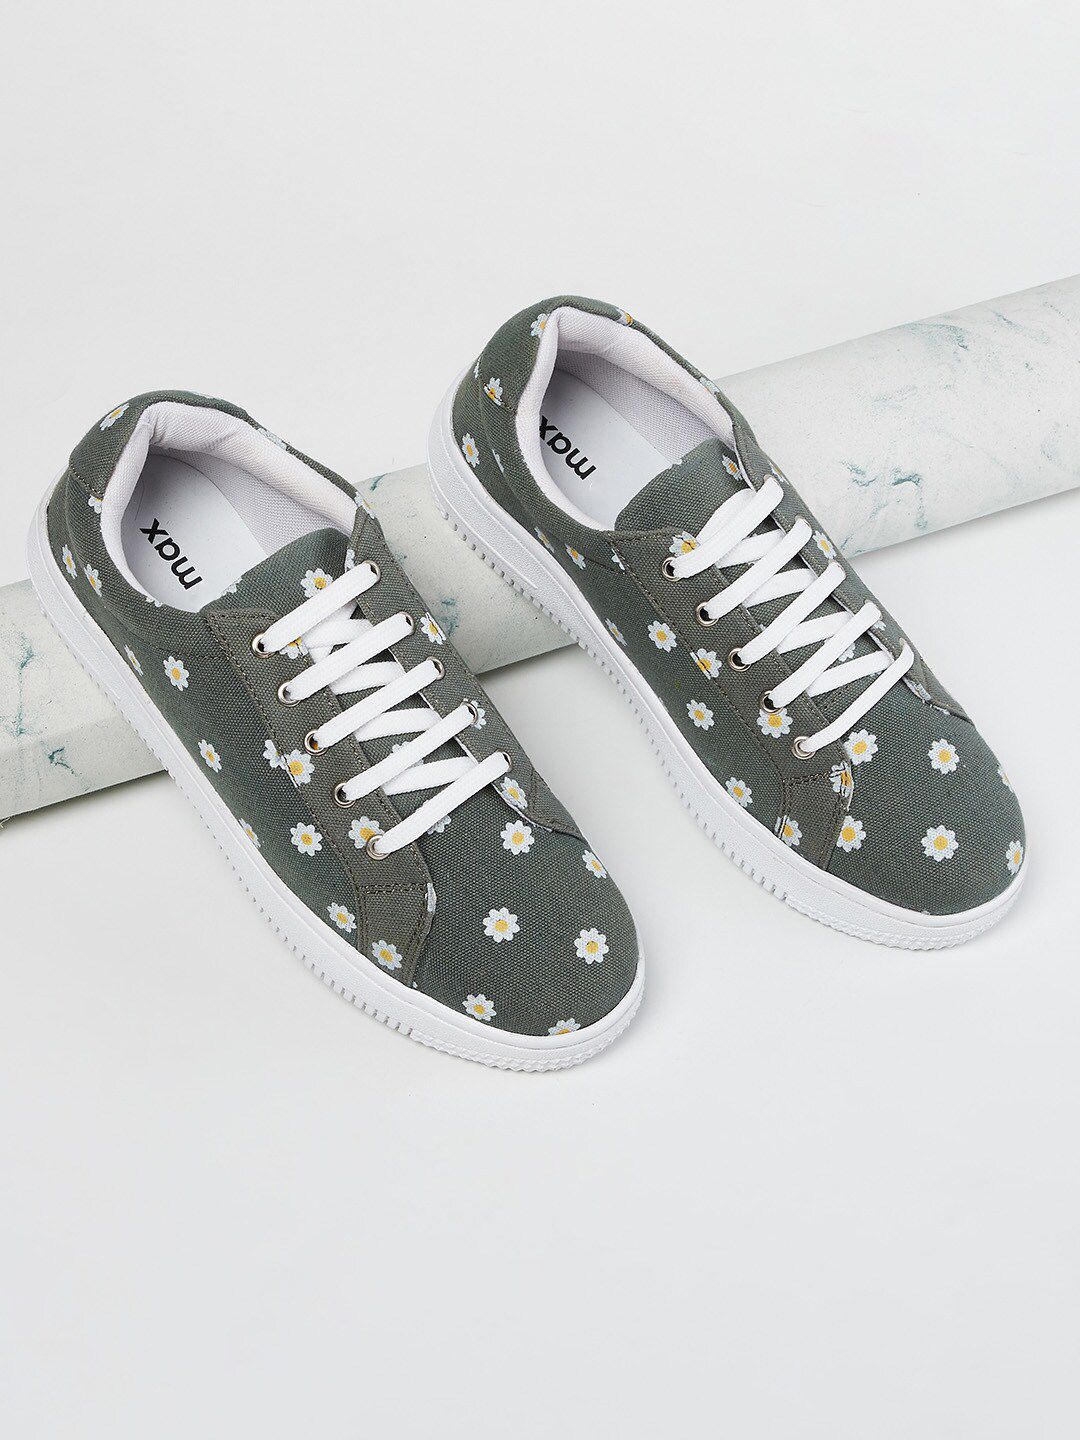 max Women Olive Green & White Printed Sneakers Price in India